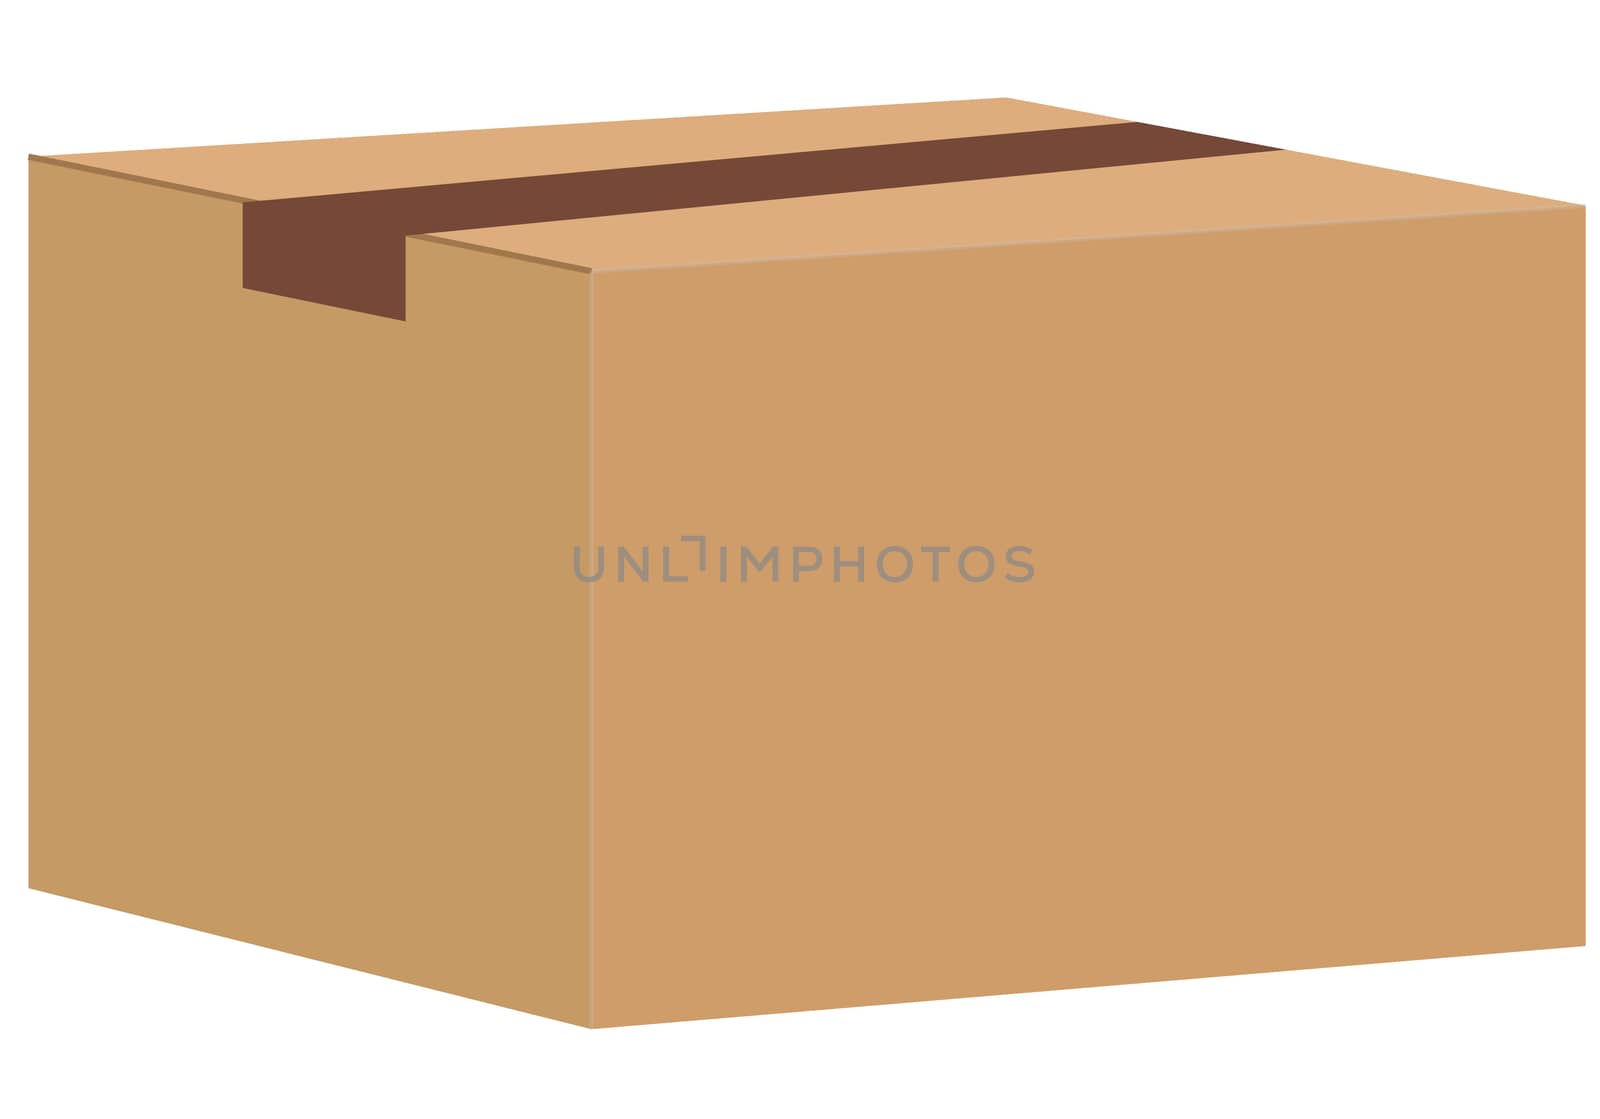 Brown closed carton delivery packaging box isolated on white background. box sign.